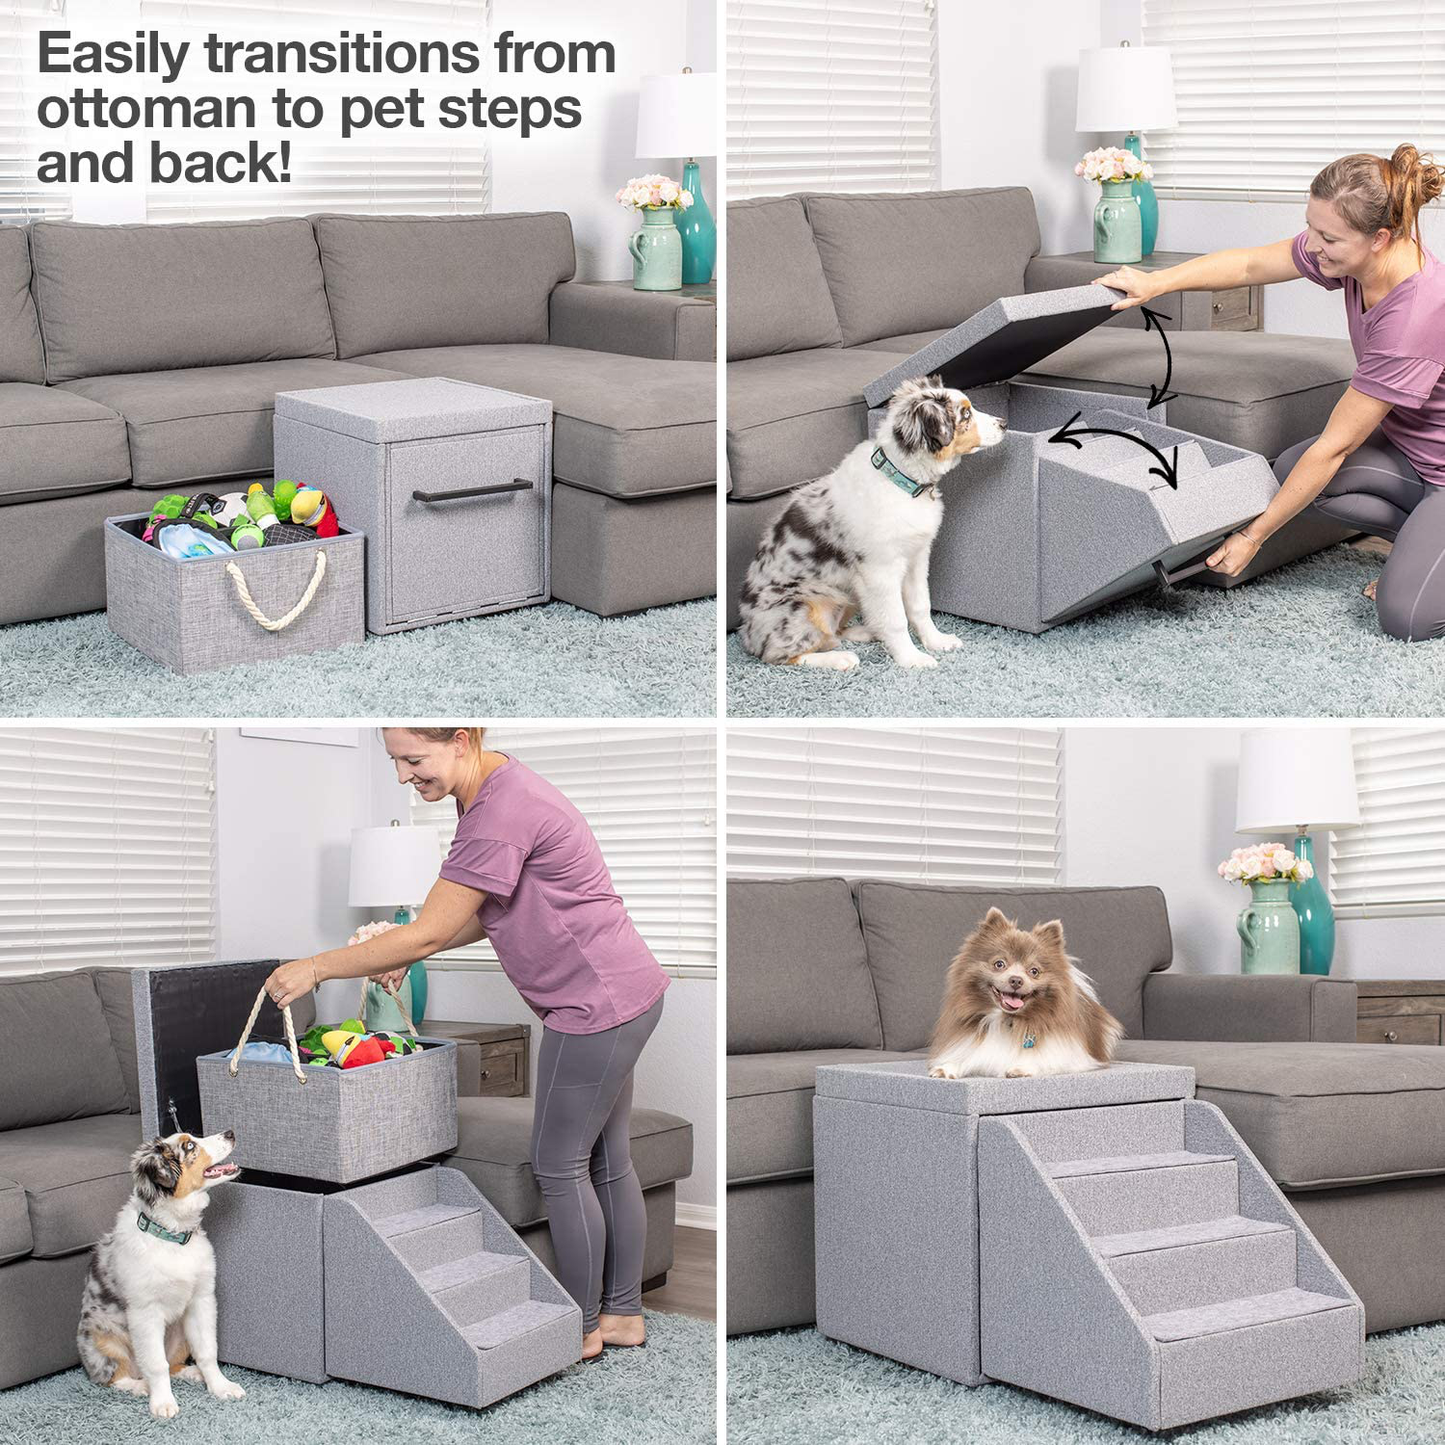 Petfusion Multi-Purpose Pet Stairs, Foldaway Cat & Dog Steps. Ottoman & Dog Toy Basket & Storage, Great Dog & Cat Window Perch (18X18X18”) Perfect Pet Steps for Couch, Bed, or Window. 1 Year Warr